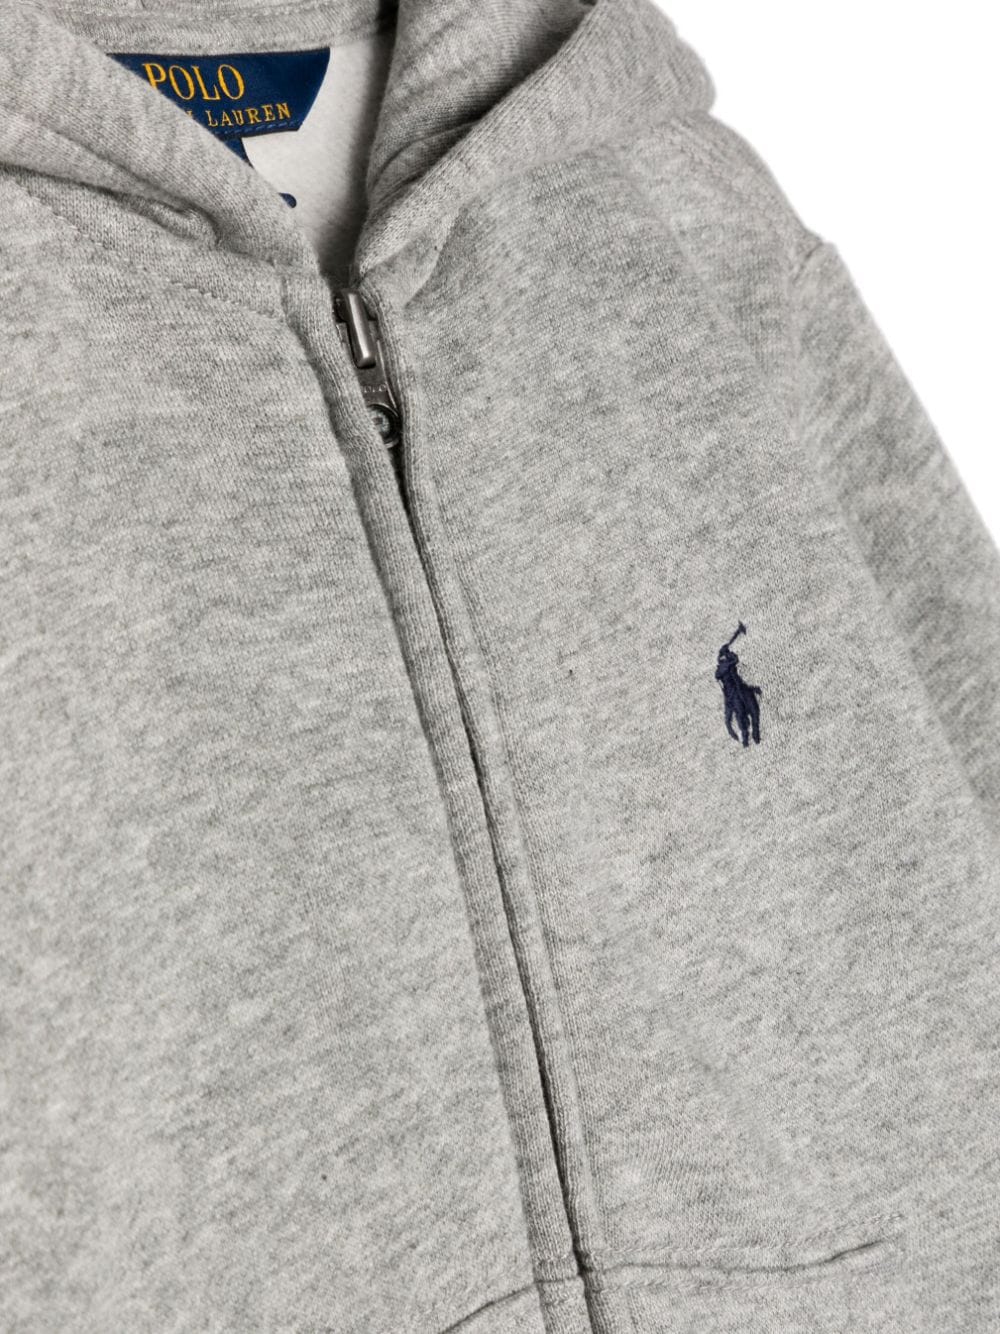 Polo Pony zip-up hoodie<BR/><BR/>